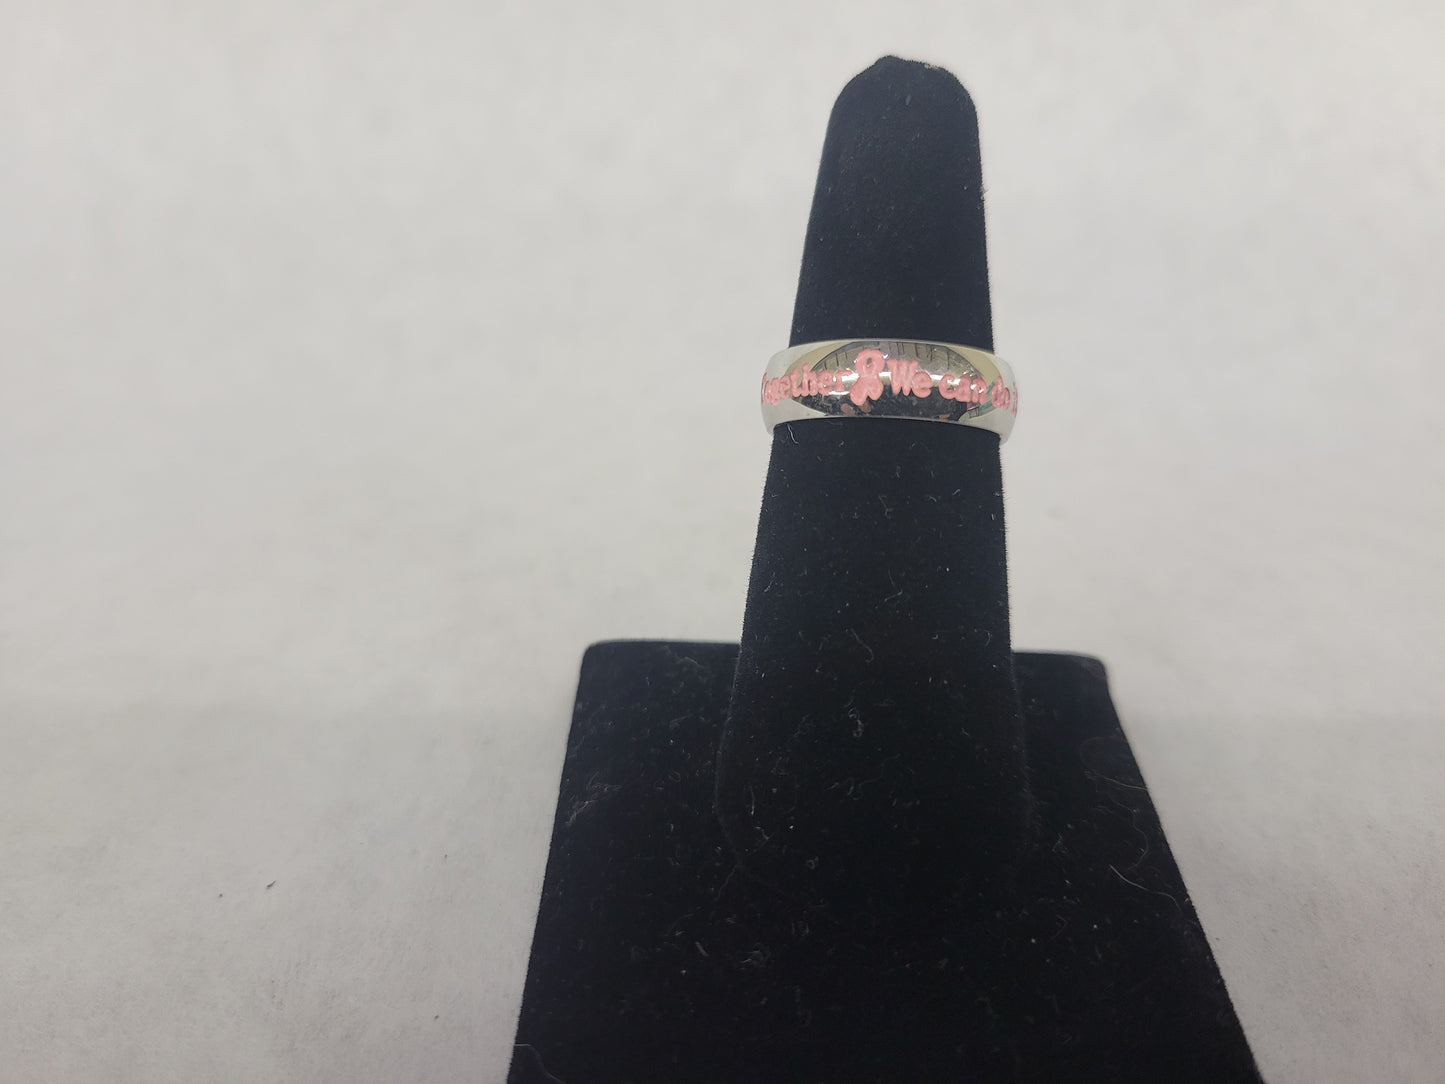 Outlaw Faith Wear "Together We Can Do It" Breast Cancer Ring